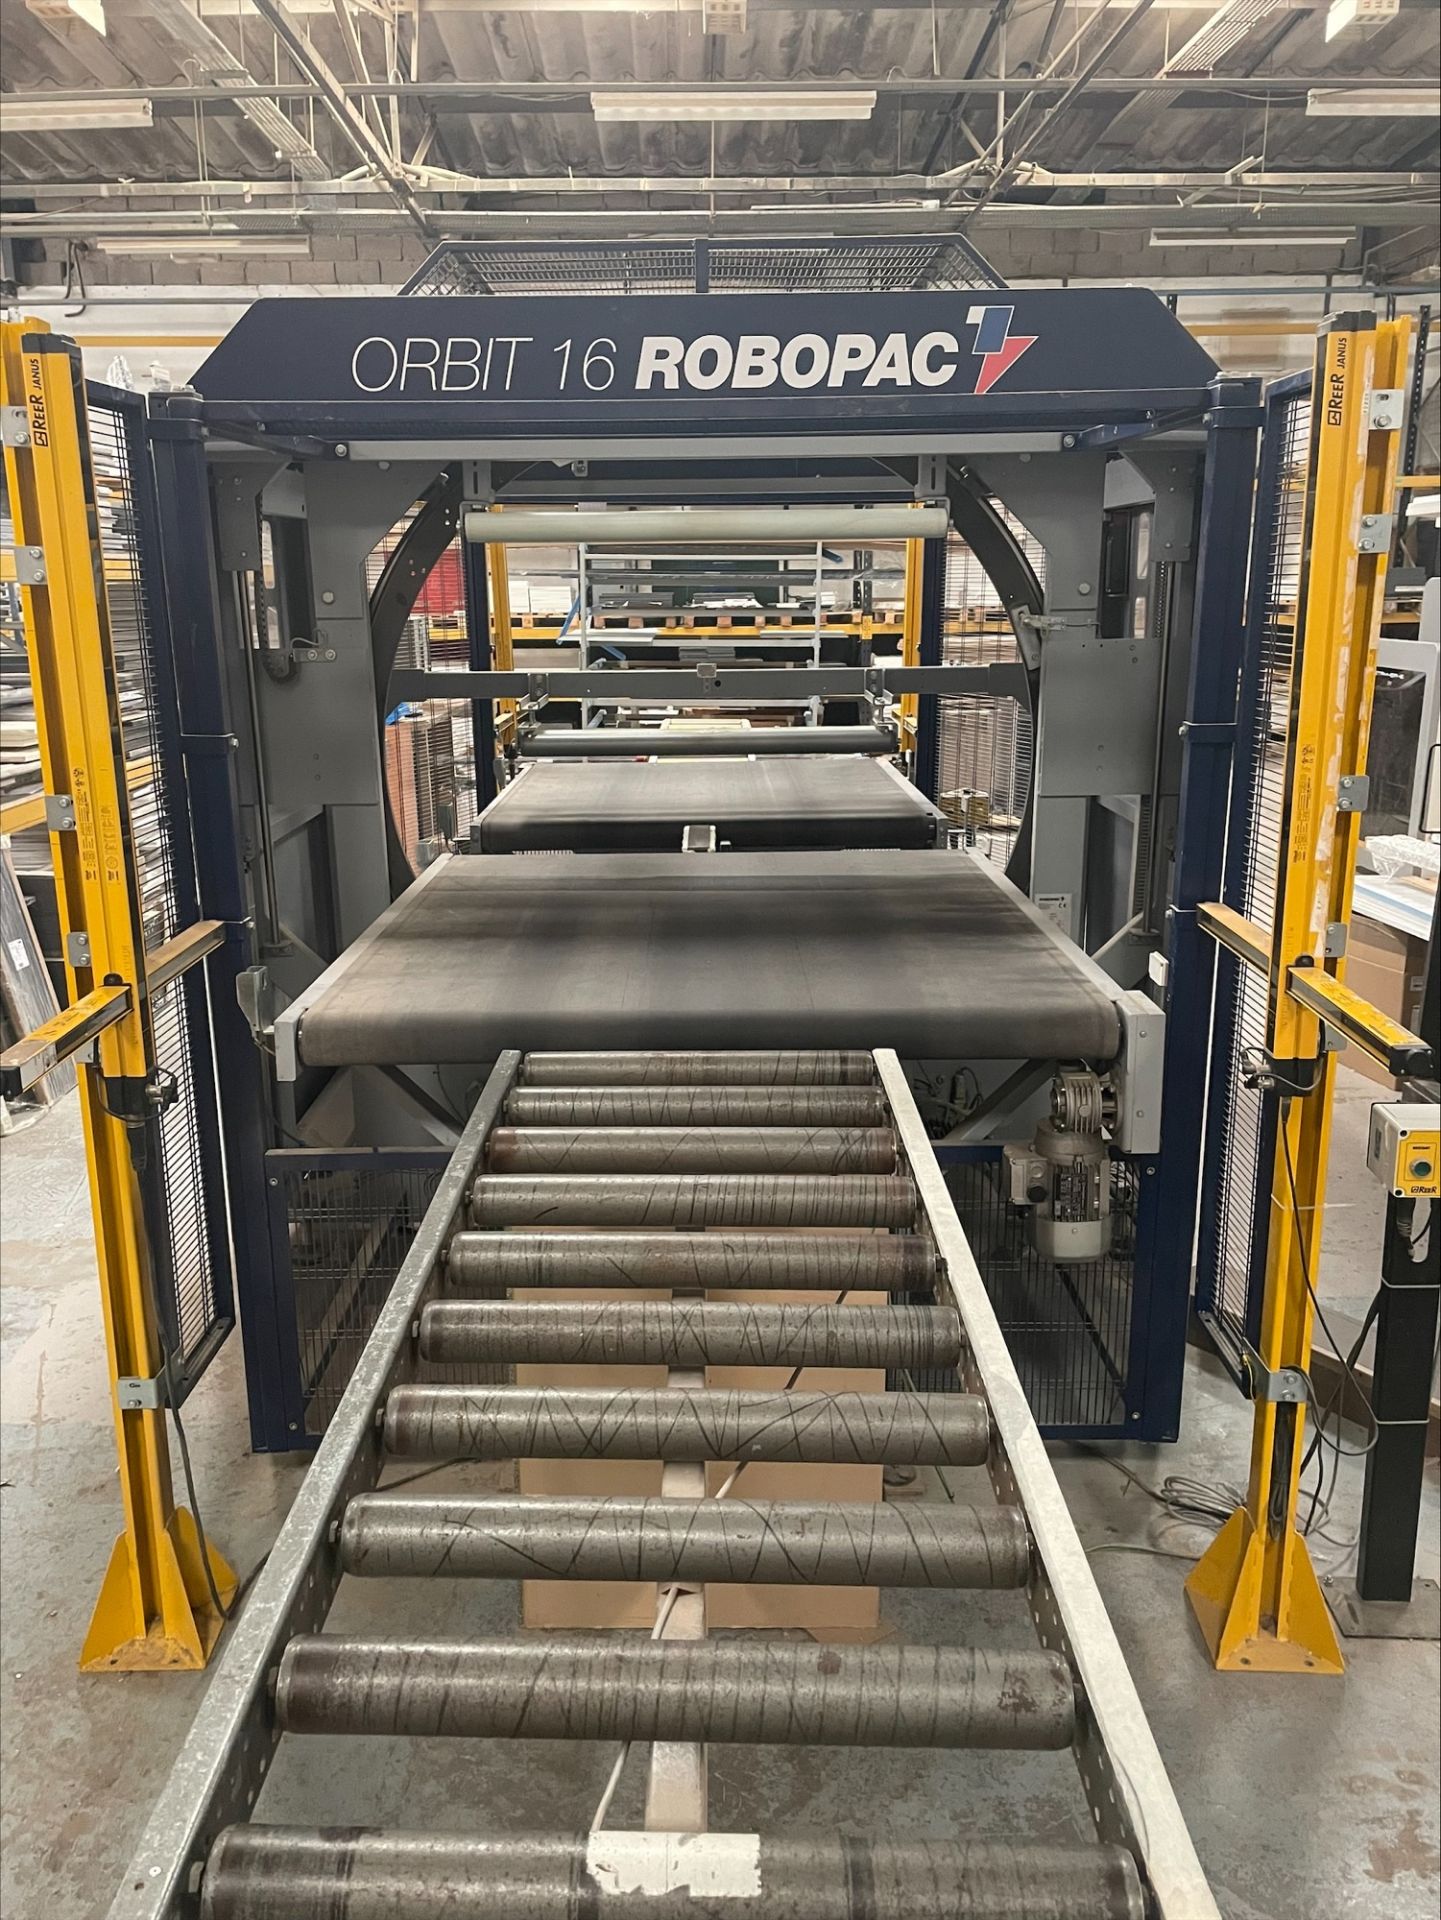 Robopac Orbit 16 Rotating ring wrapping machine, Serial No. 30151046 (2016) with Schneider Electrics - Image 8 of 10